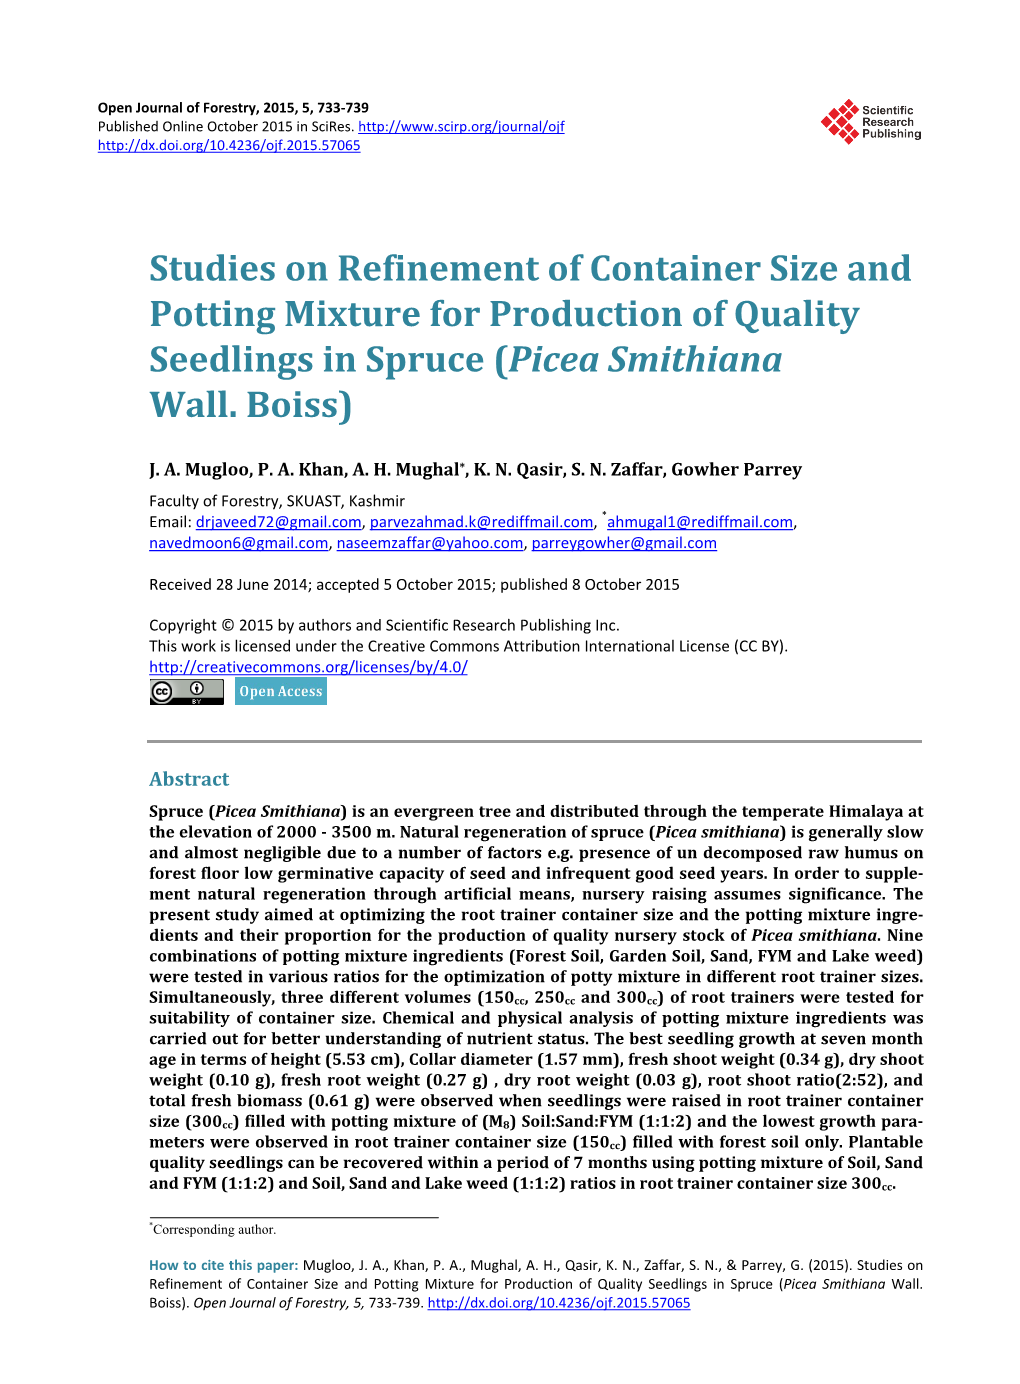 Studies on Refinement of Container Size and Potting Mixture for Production of Quality Seedlings in Spruce (Picea Smithiana Wall